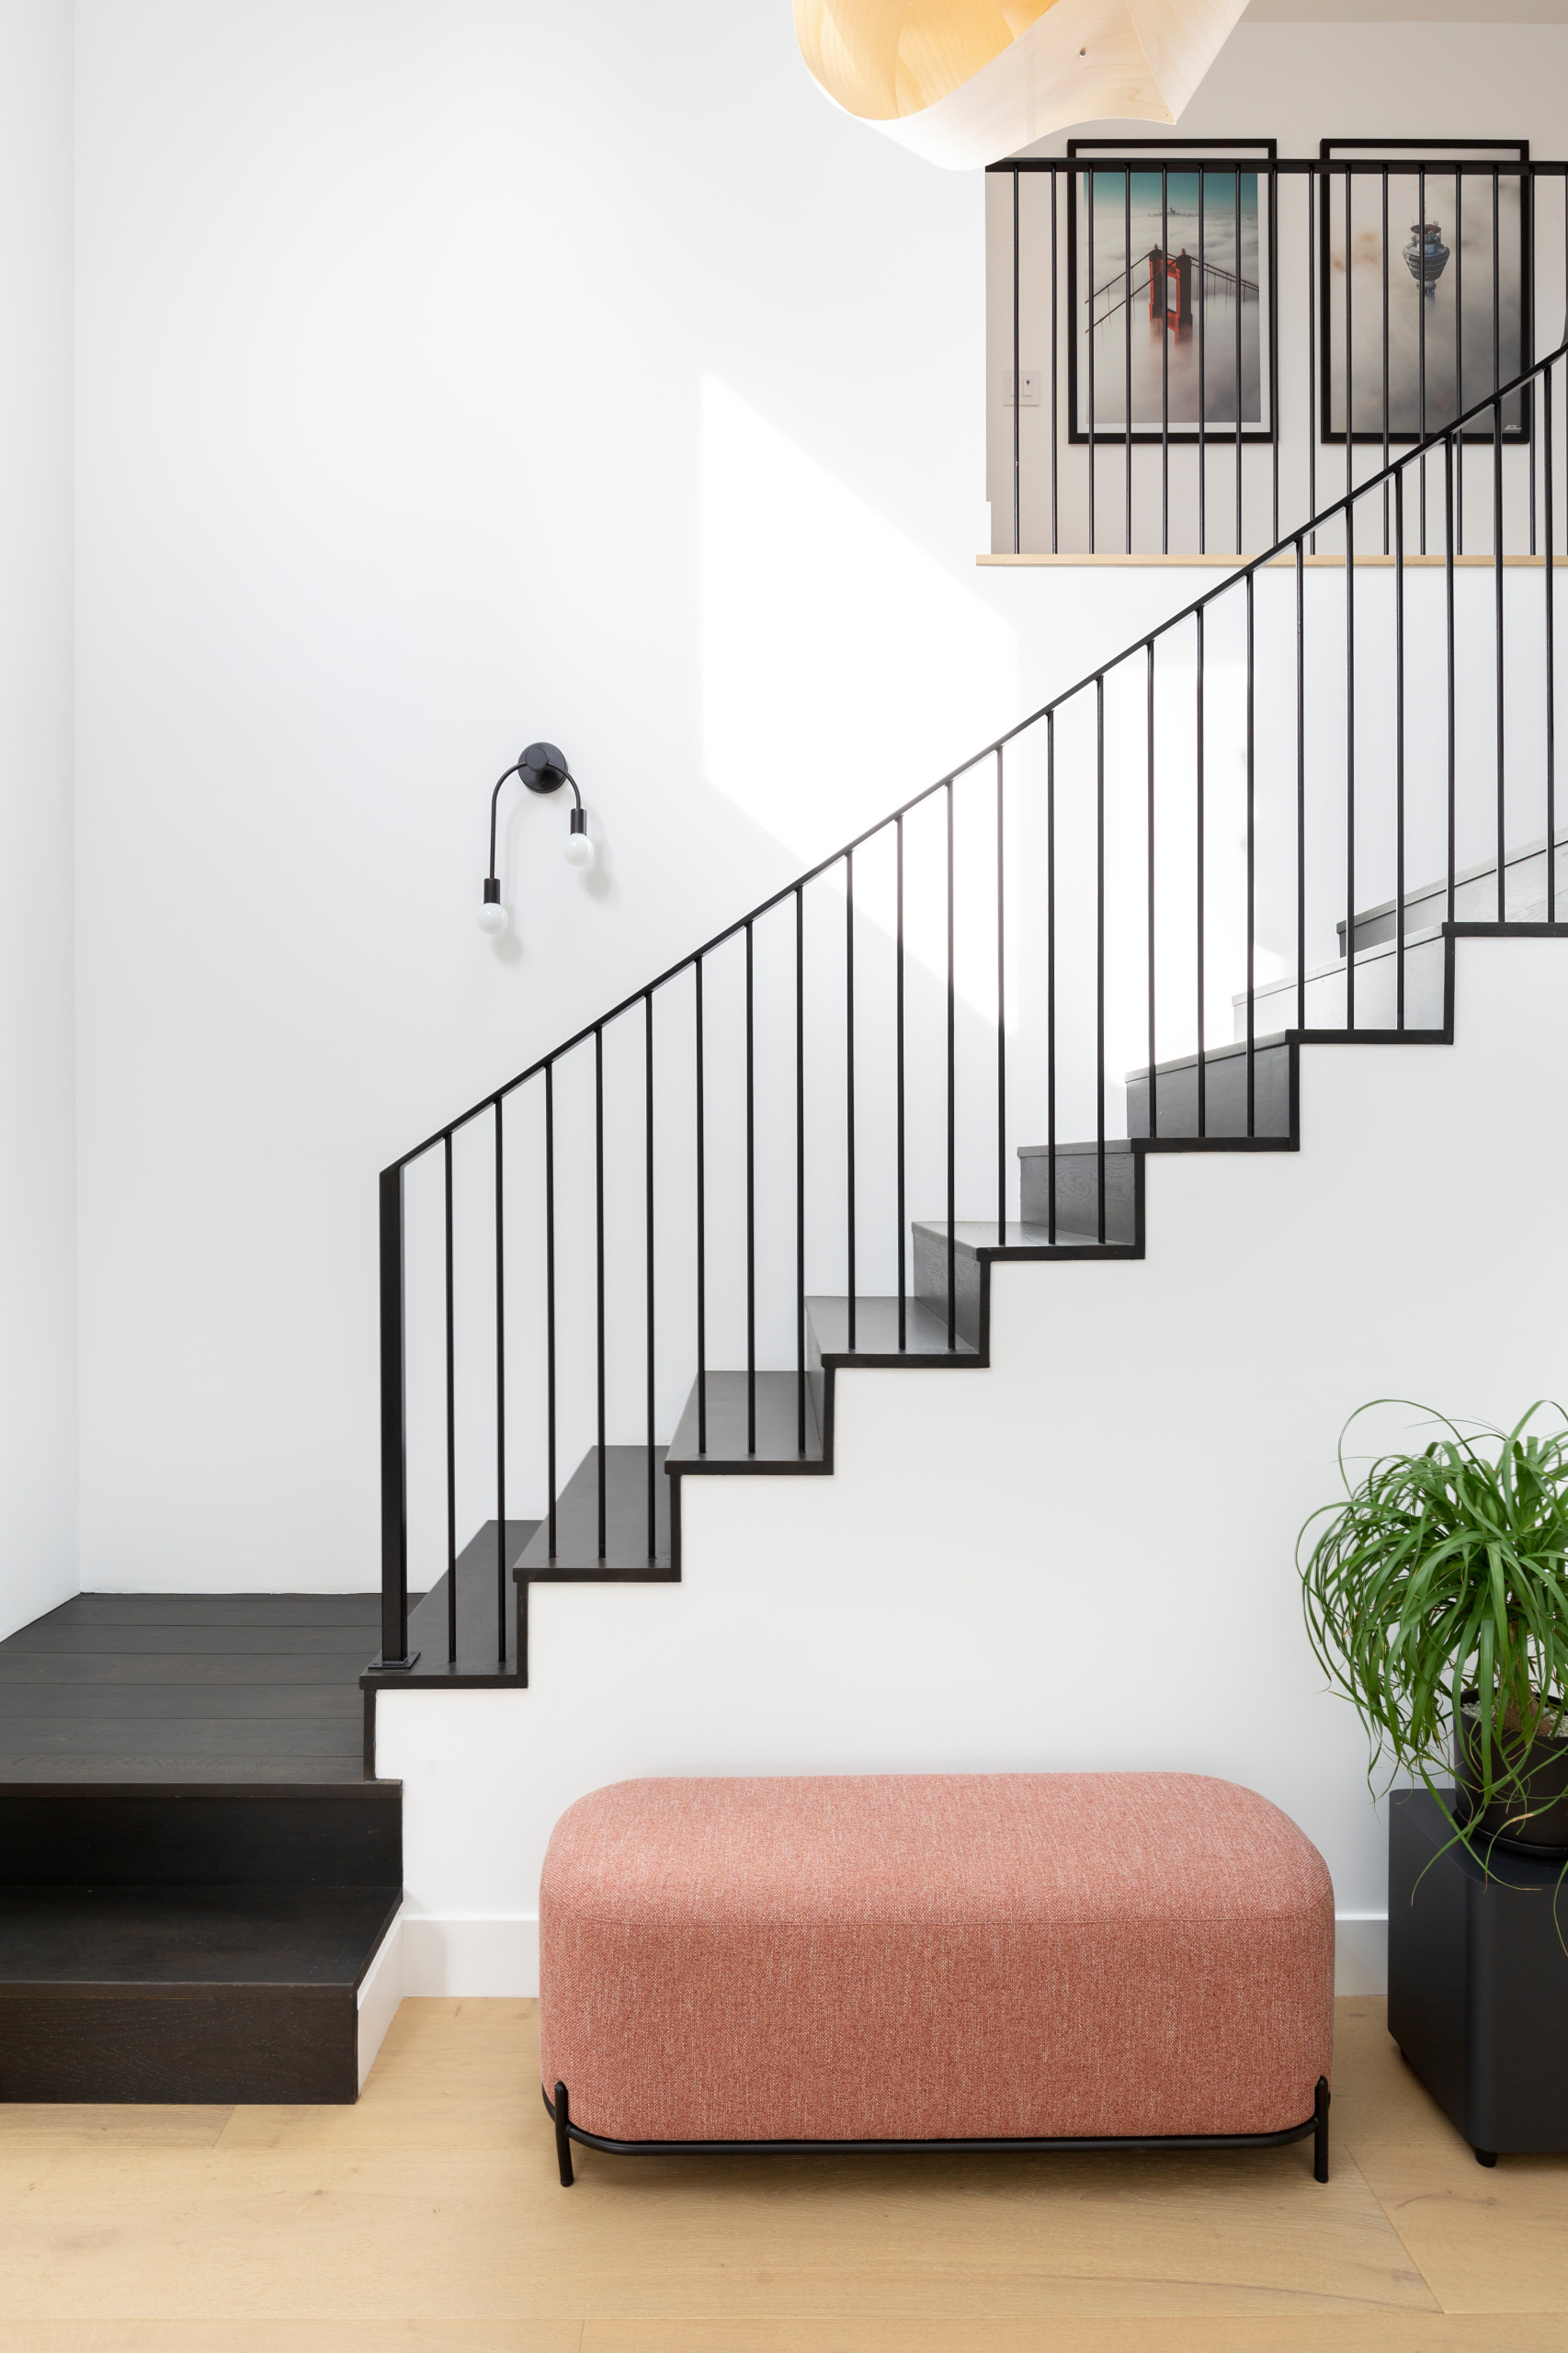 18 Simplistic Scandinavian Staircase Designs For Houses And Lofts